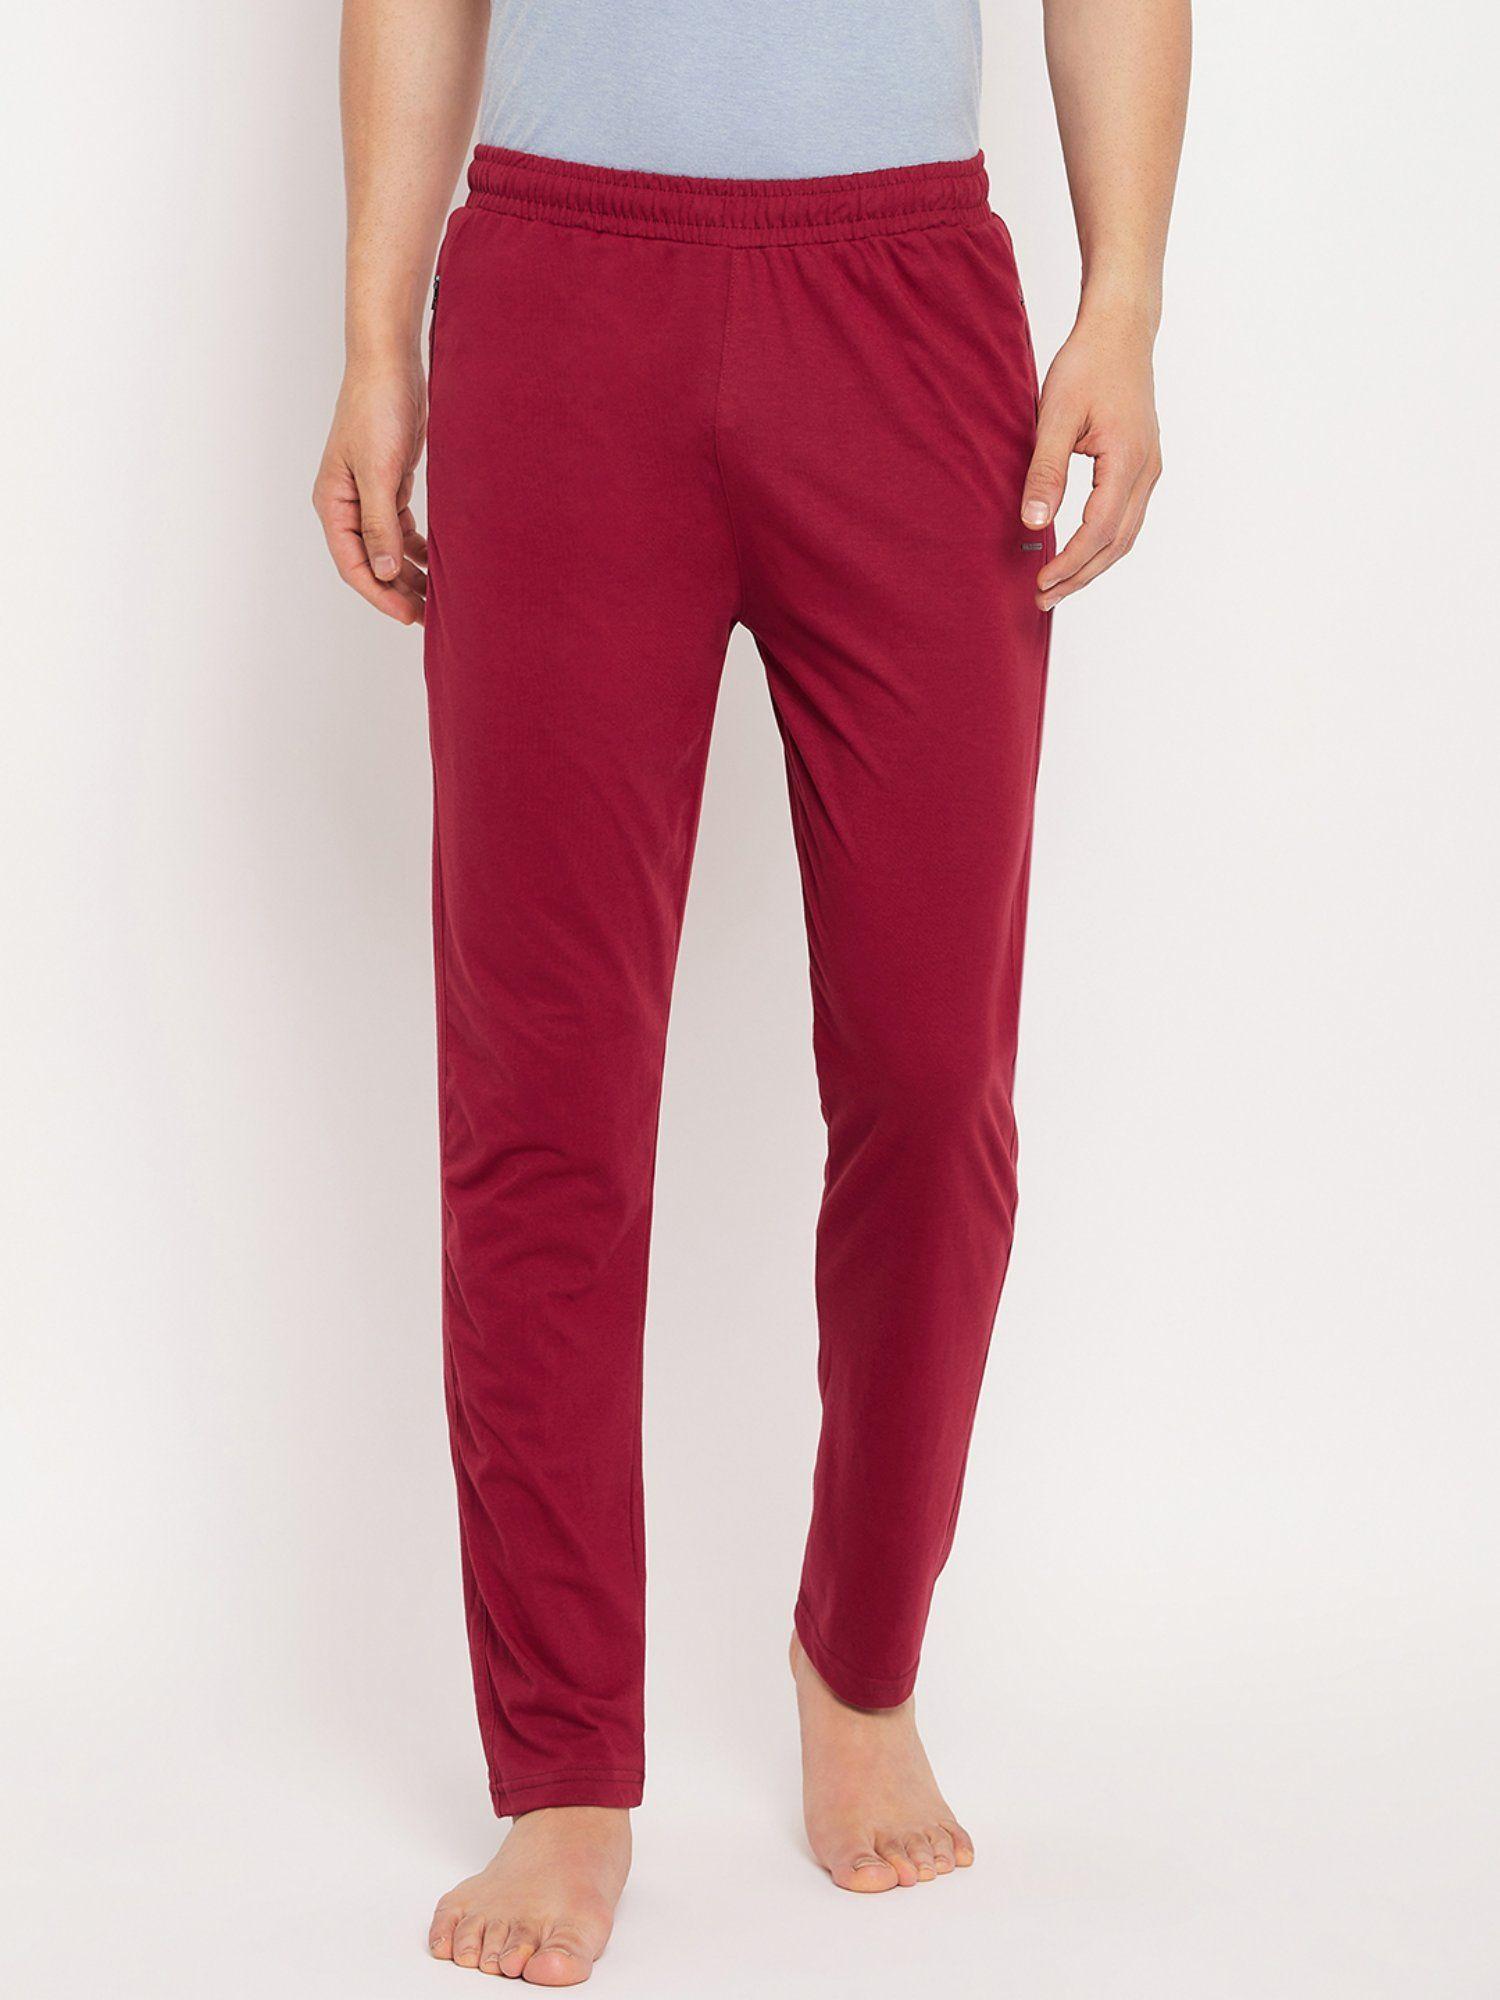 mens lounge pants - red